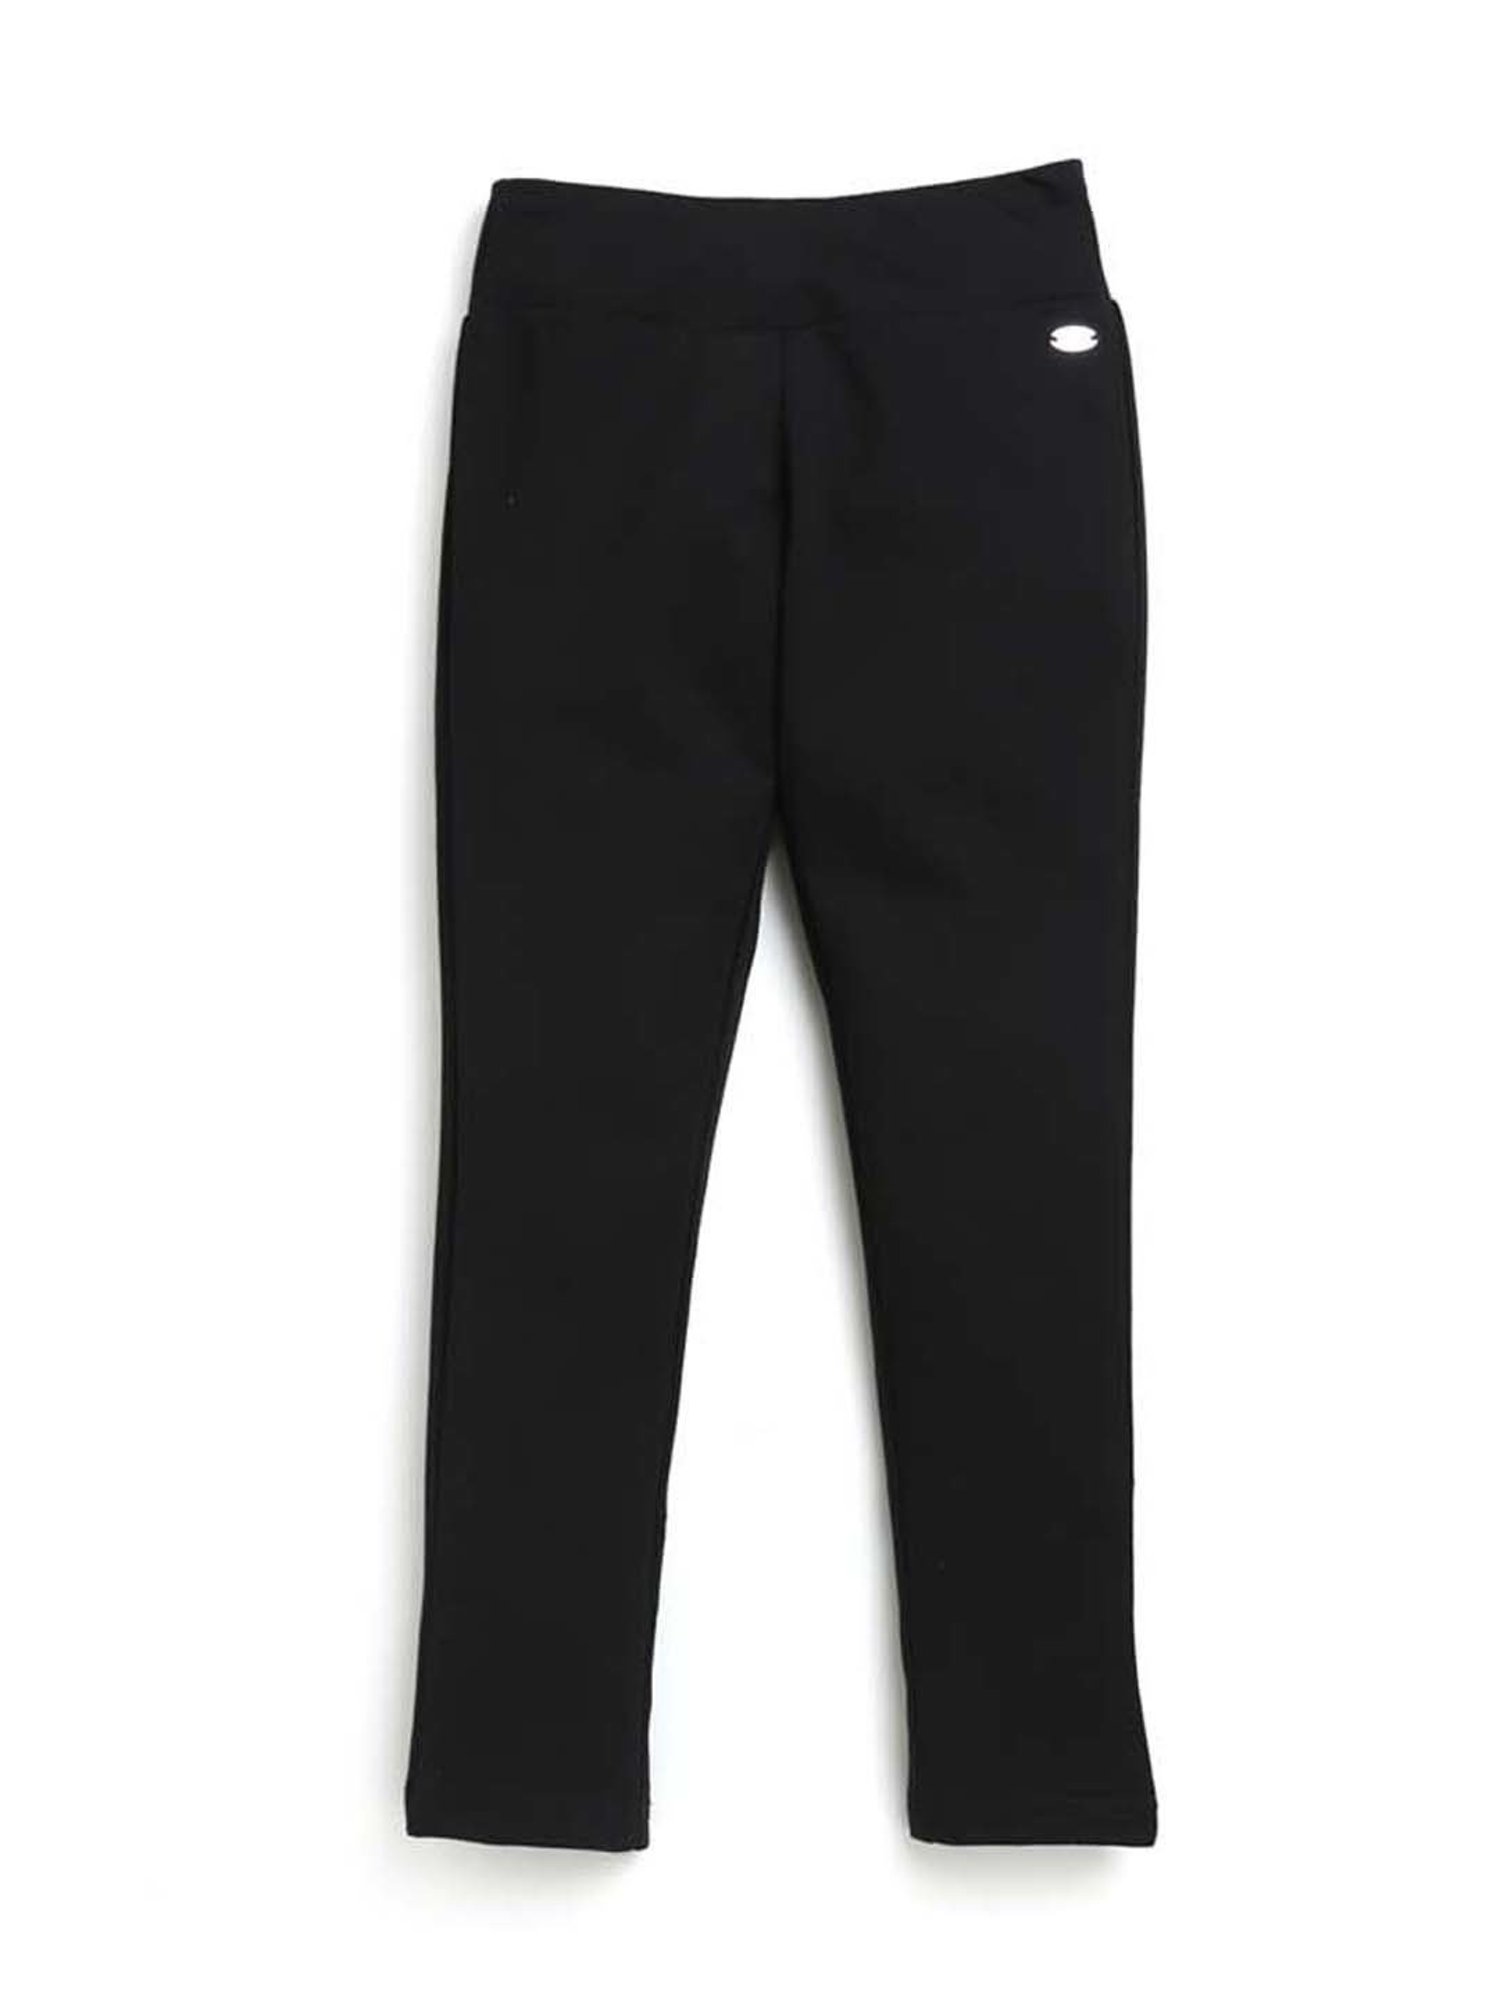 BOYS BLACK PANT by Bodywrappers - All 4 Dance | Specializing in Studio  Dress Requirements in Canada | Edmonton + Online